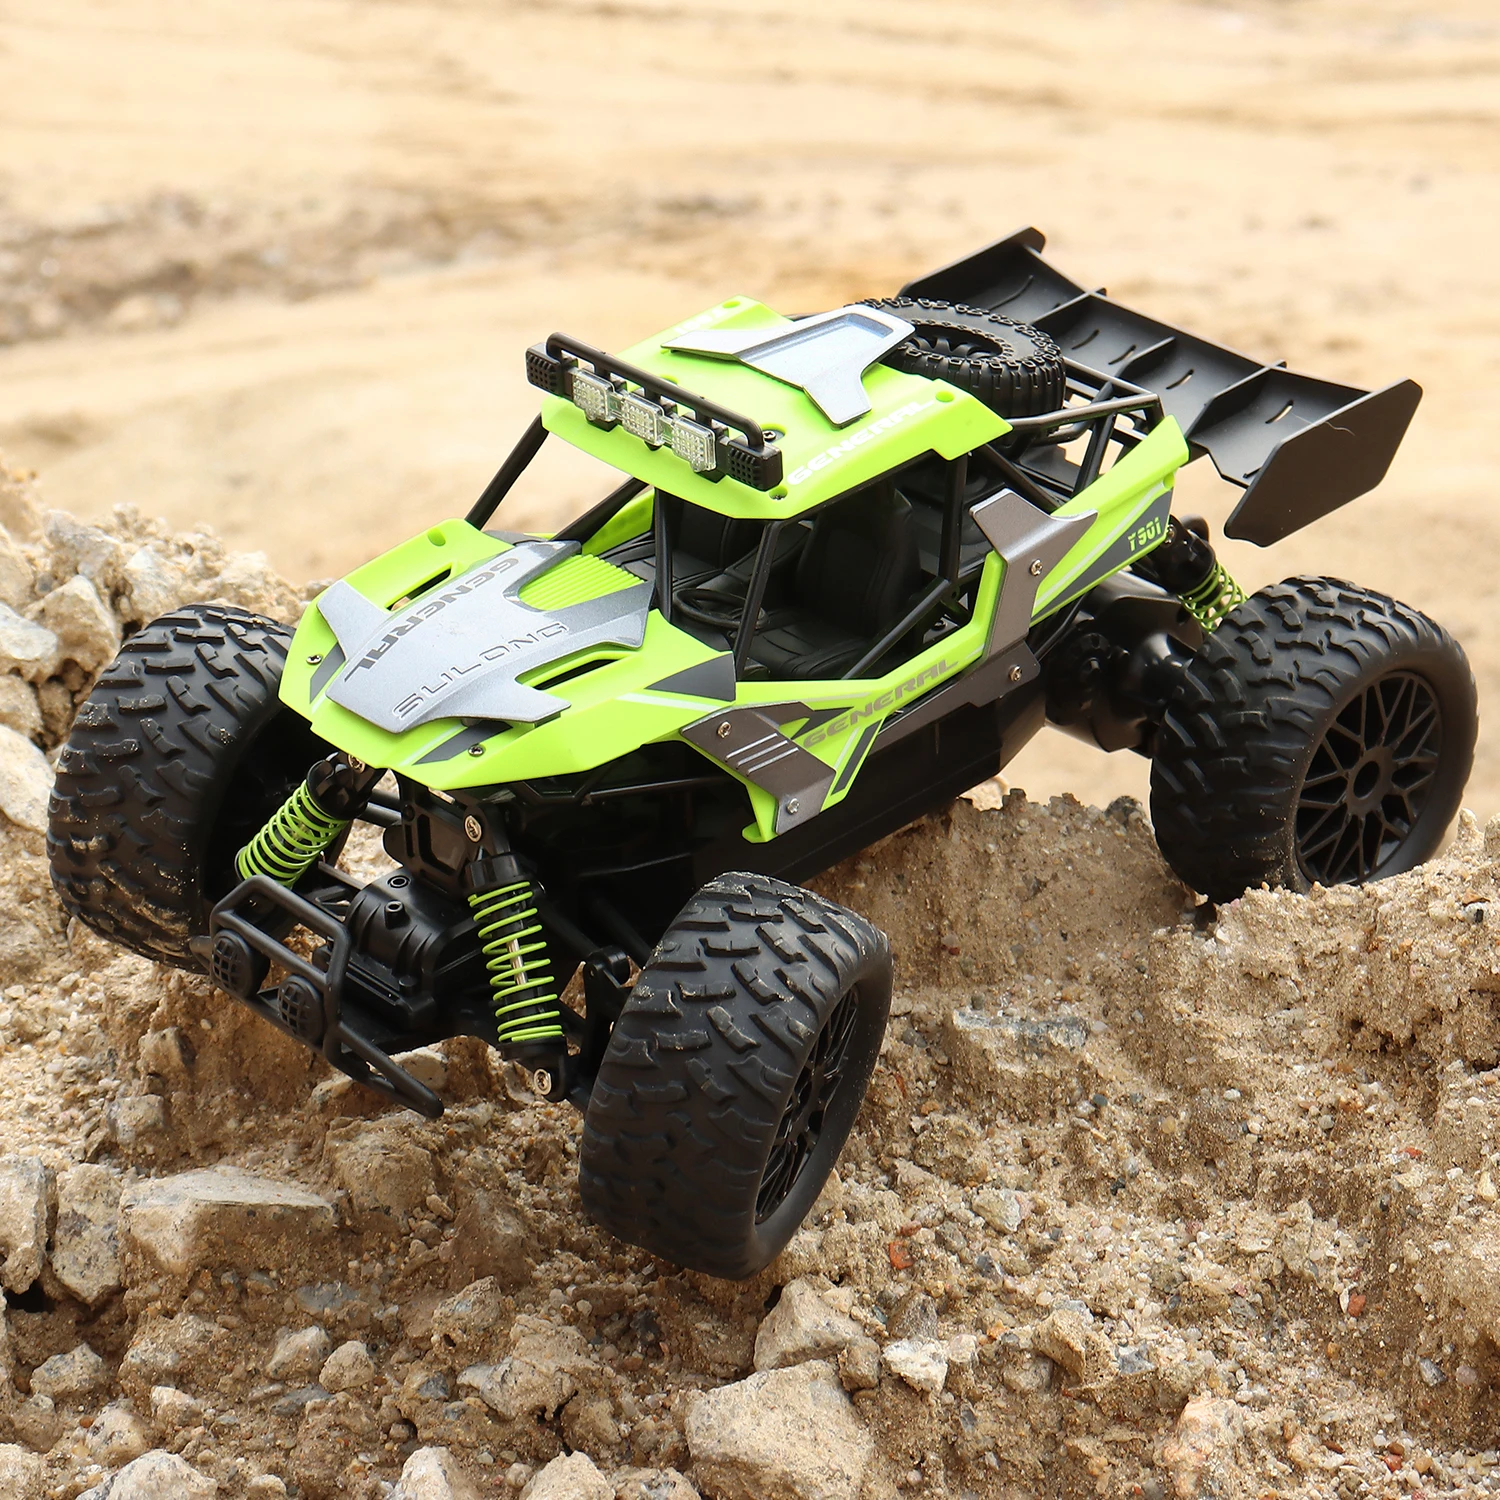 2023 New 1:14 RC Car 25km/h High Speed Off Road Vehicle, 2.4G 4WD Climbing King Alloy Remote Control Car Toy for Boys kids gift enlarge